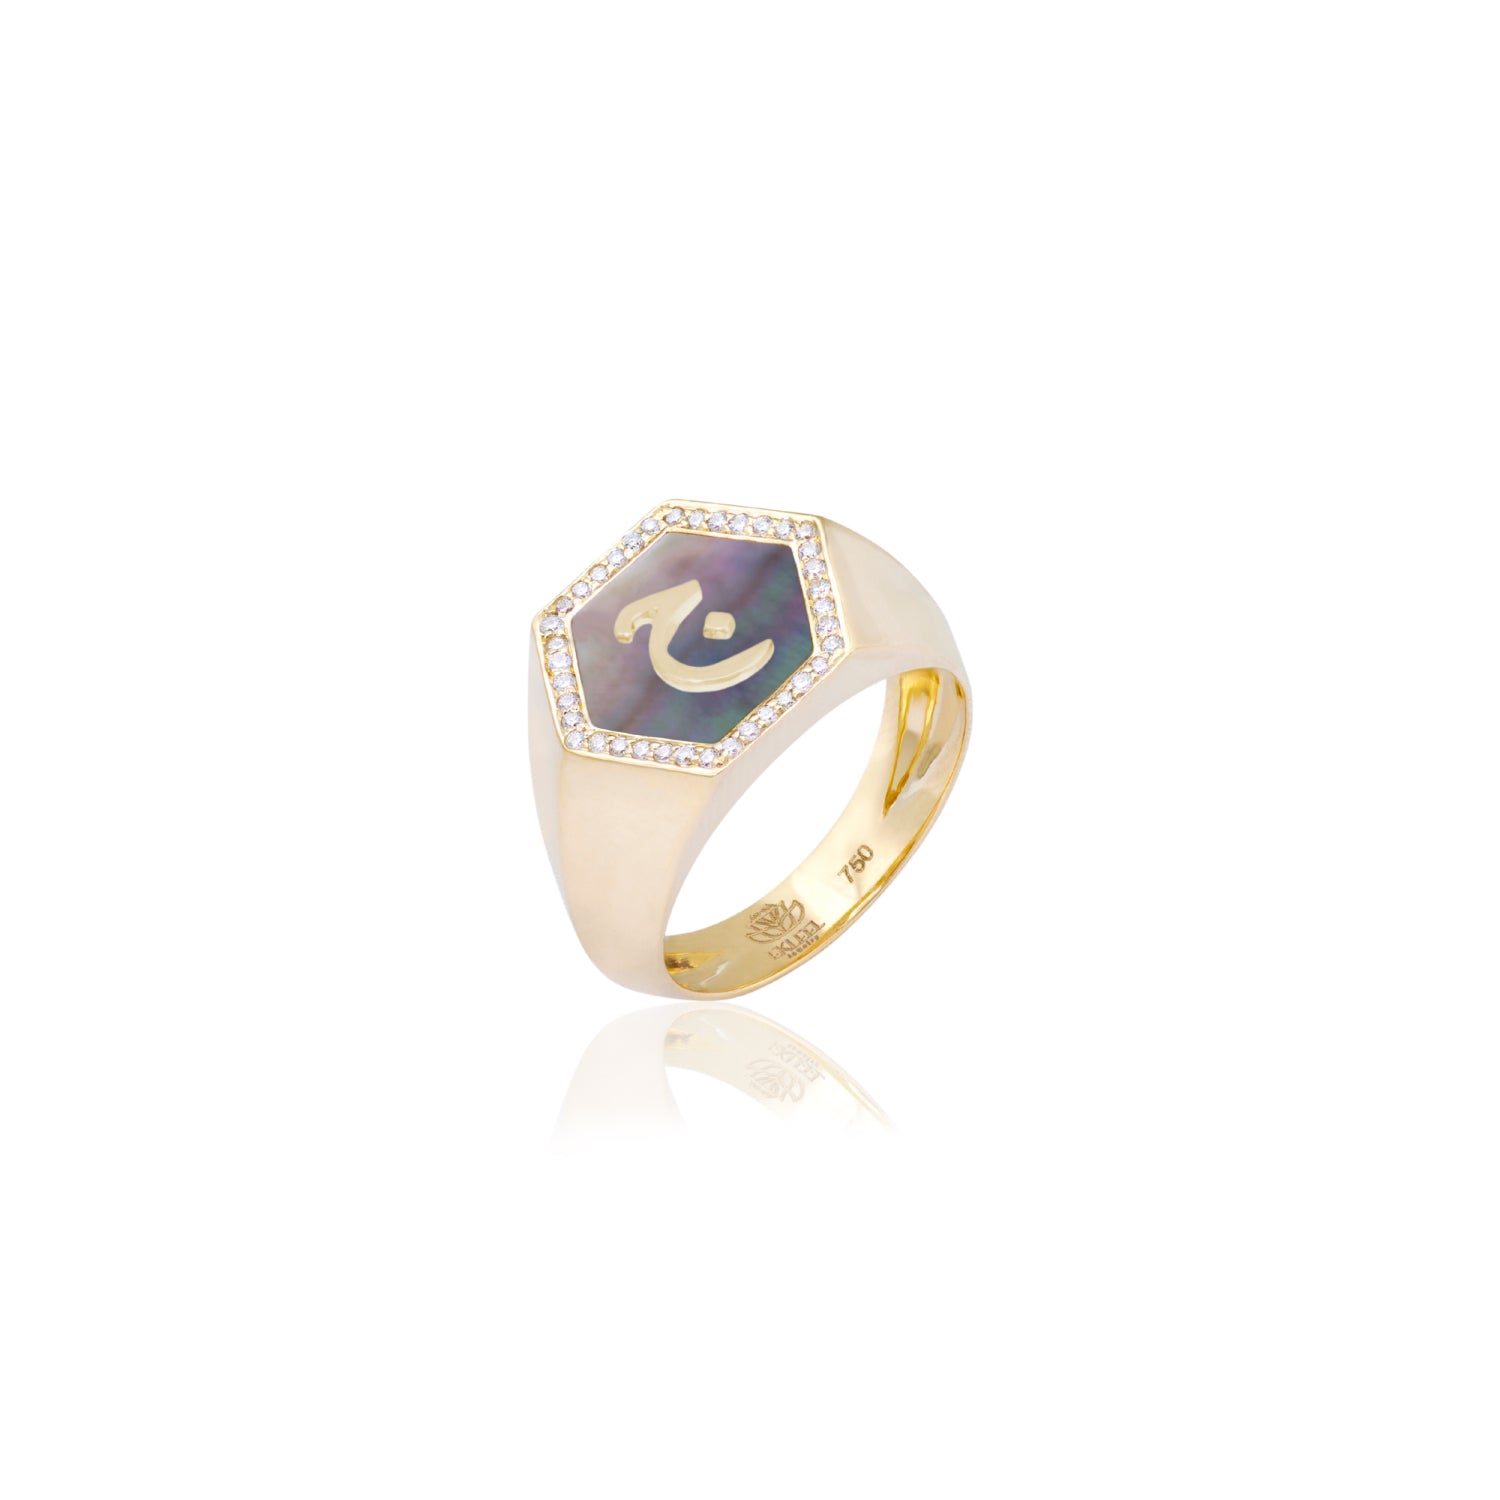 Qamoos 2.0 Letter ج Black Mother of Pearl and Diamond Signet Ring in Yellow Gold